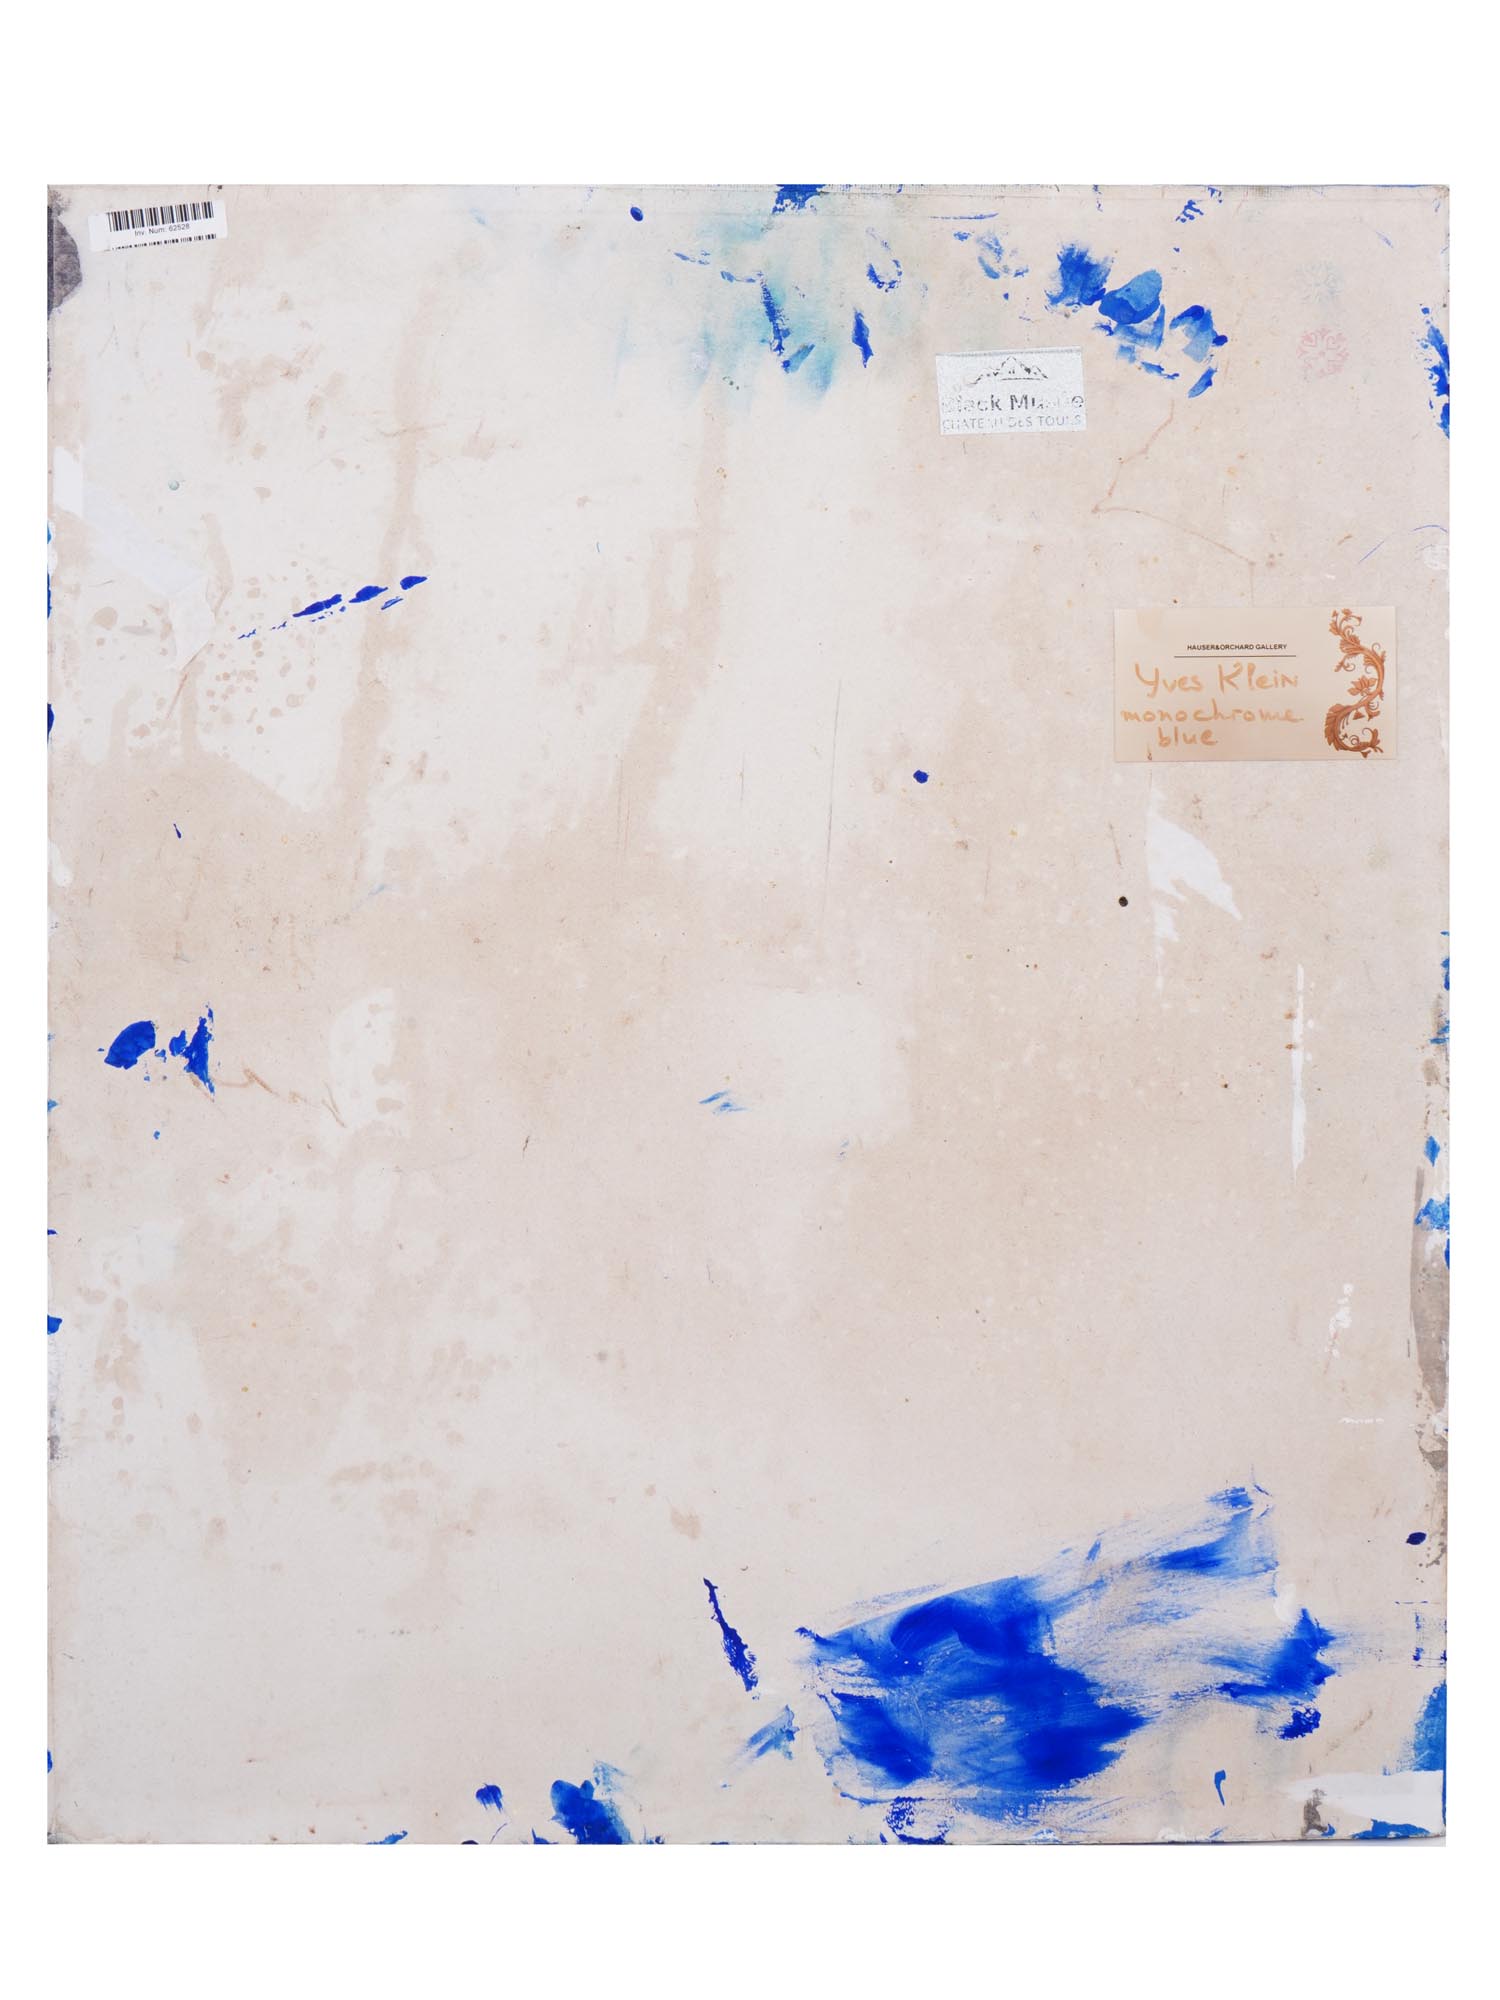 MONOCHROME BLUE MIXED MEDIA PAINTING BY YVES KLEIN PIC-5